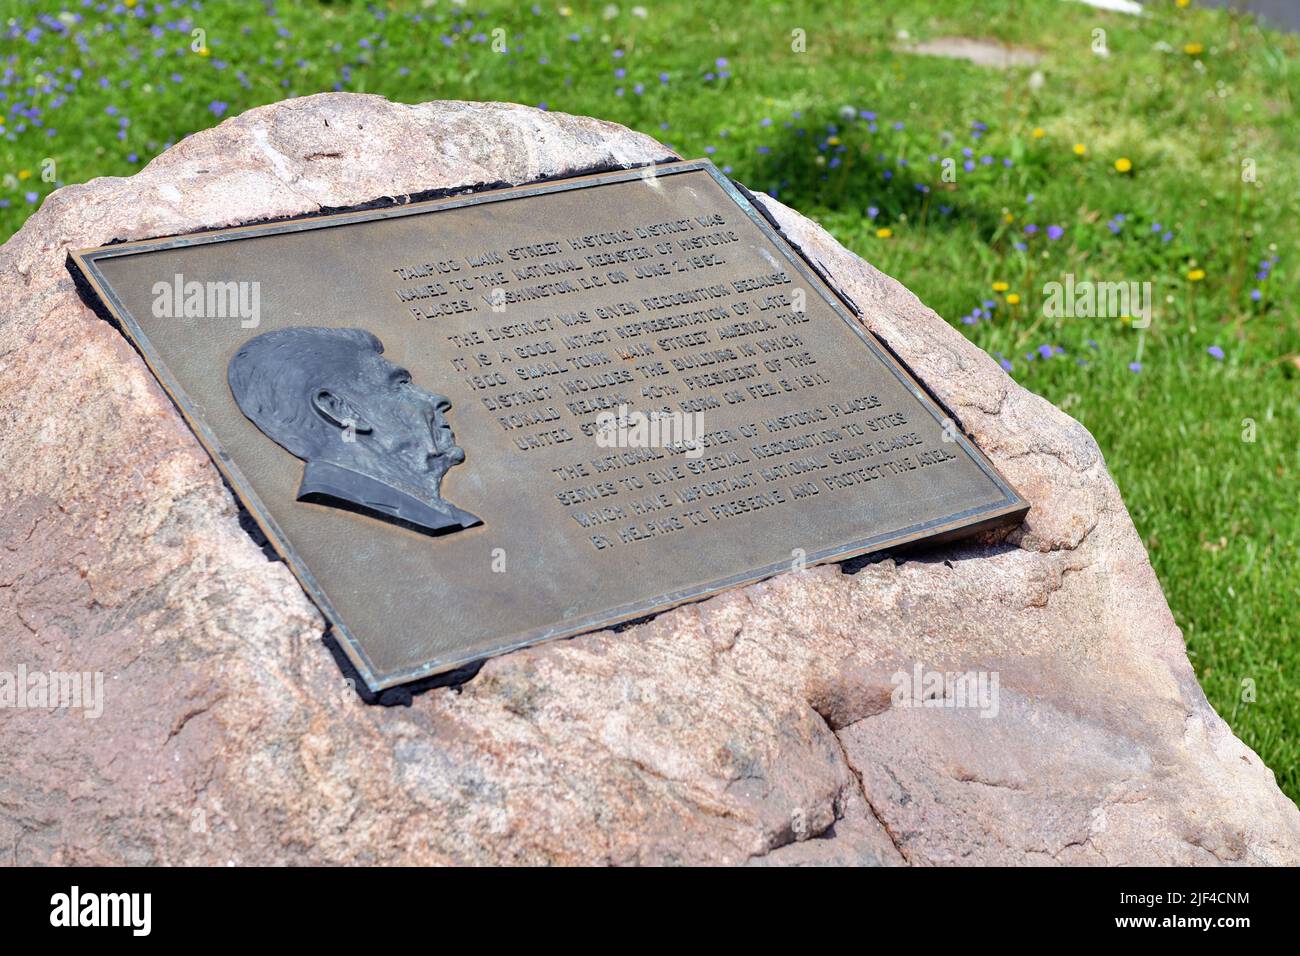 Tampico, Illinois, USA. Plaque within a rock  commemorating the birthplace of Ronald Reagan, the 40th President of the United States. Stock Photo